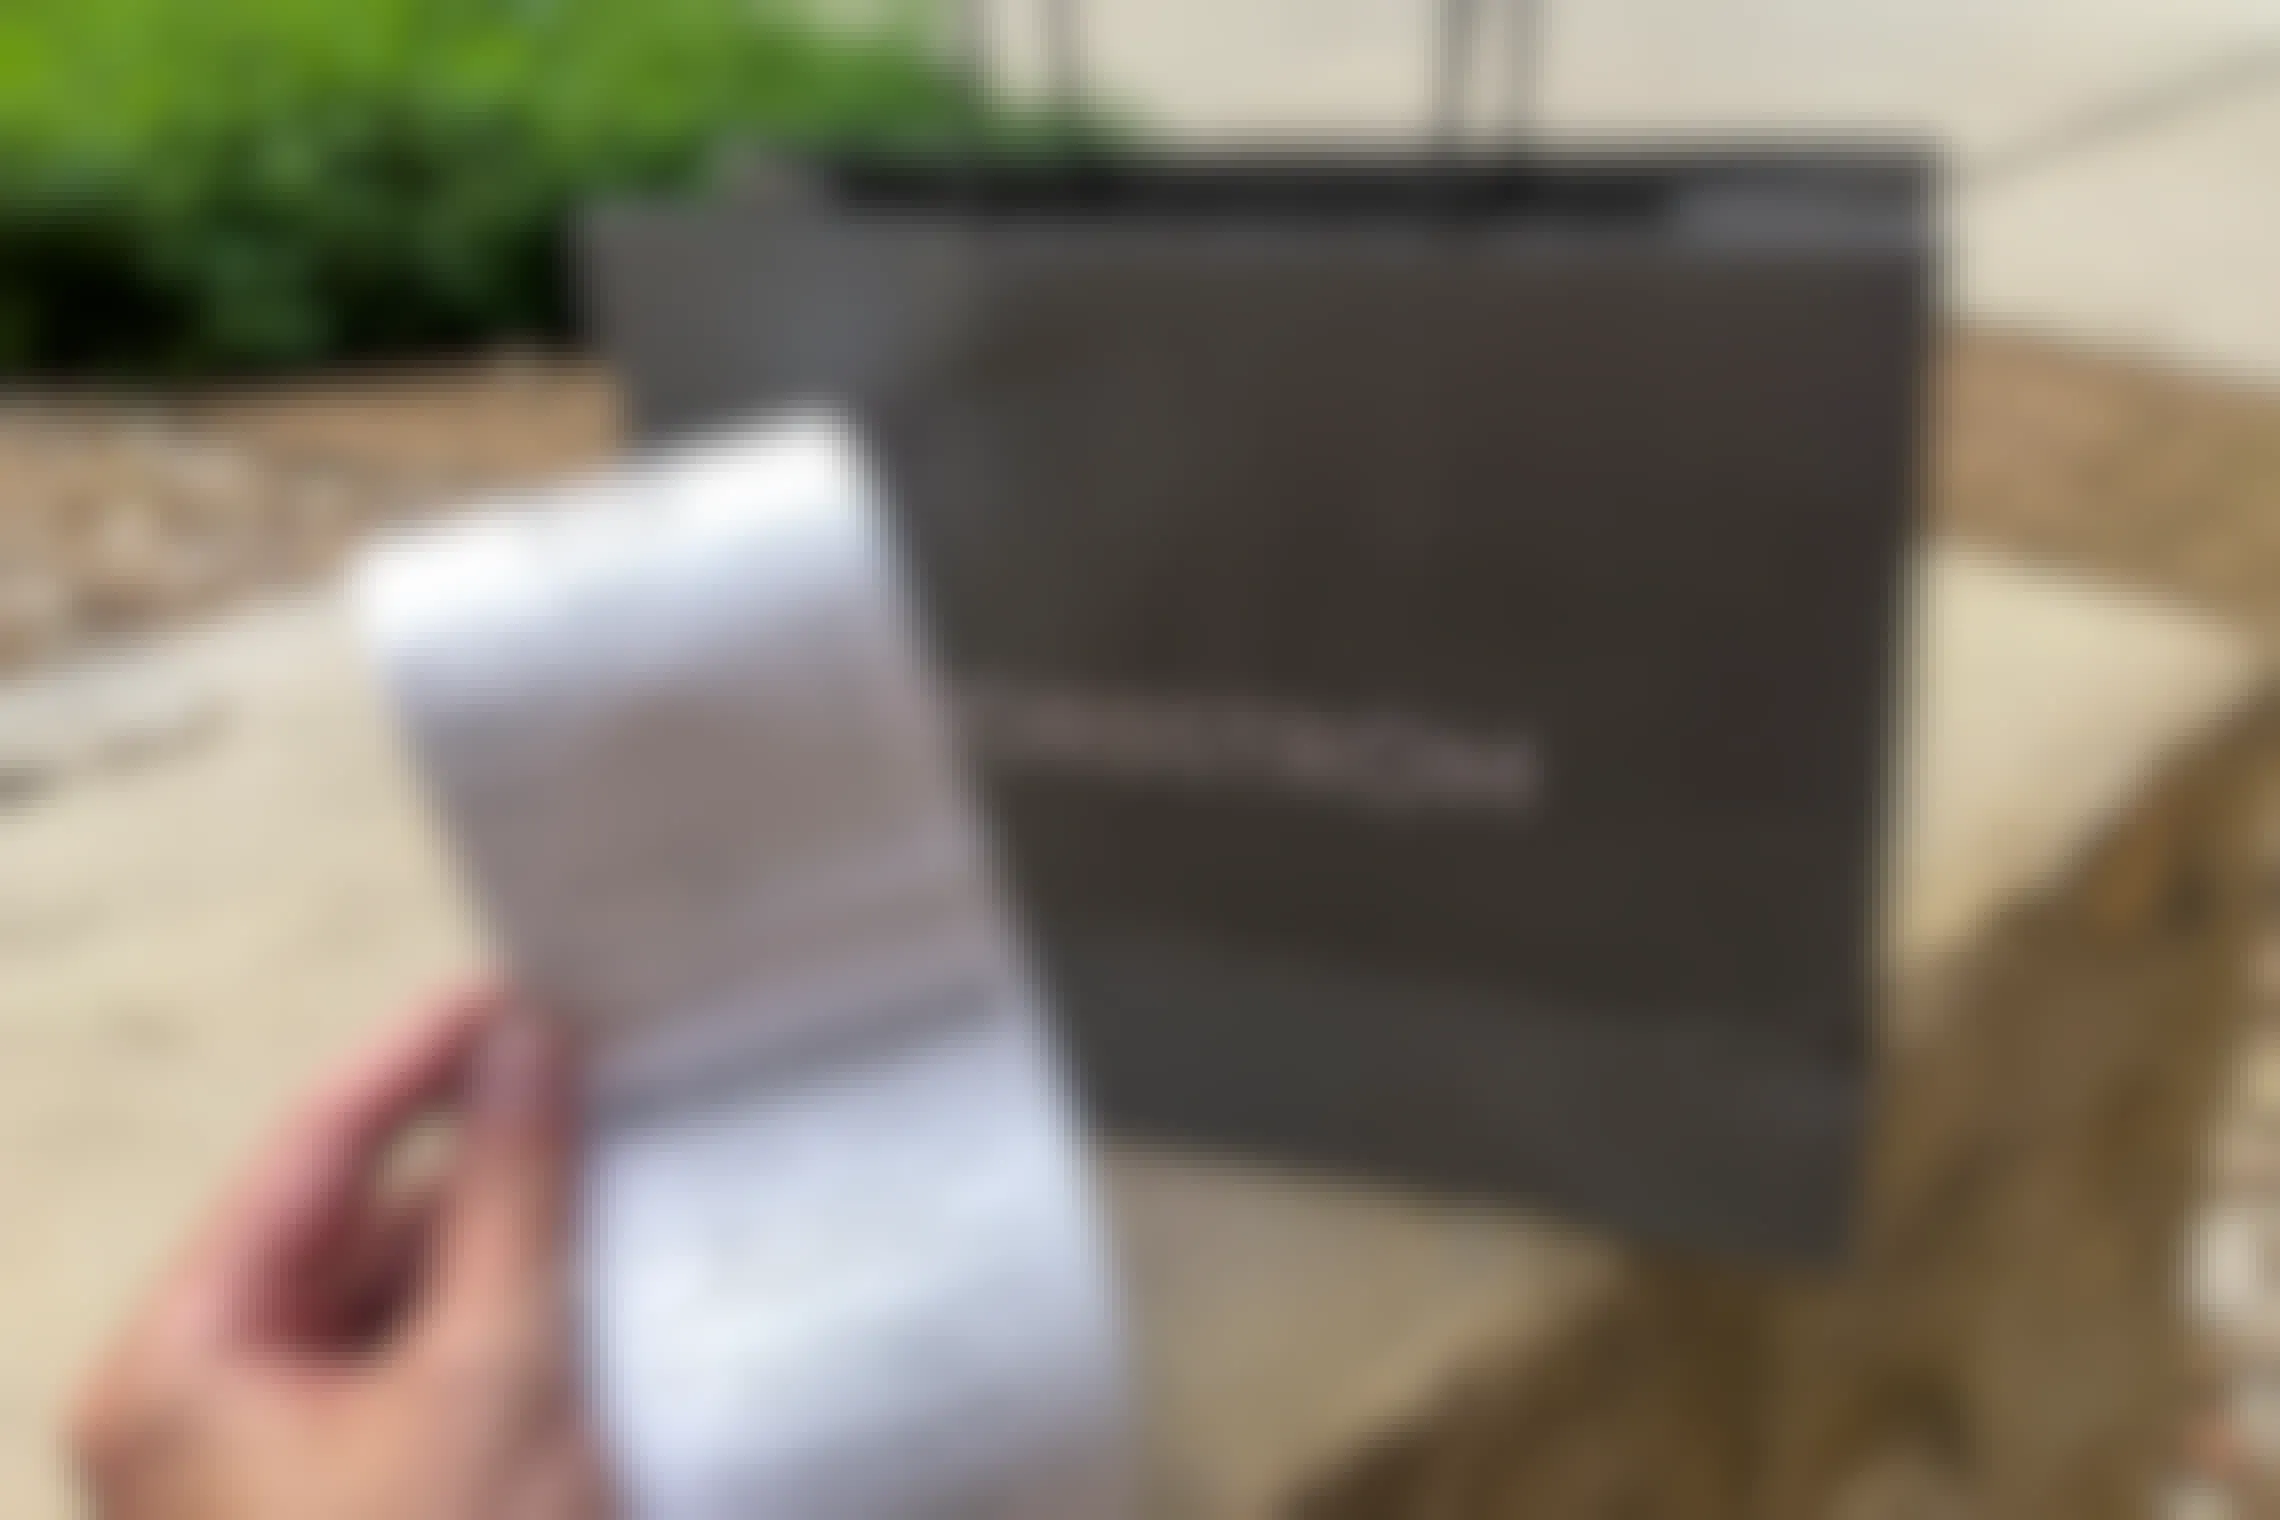 Nordstrom Return Policy Is the GOAT - Here Are 7 Reasons Why